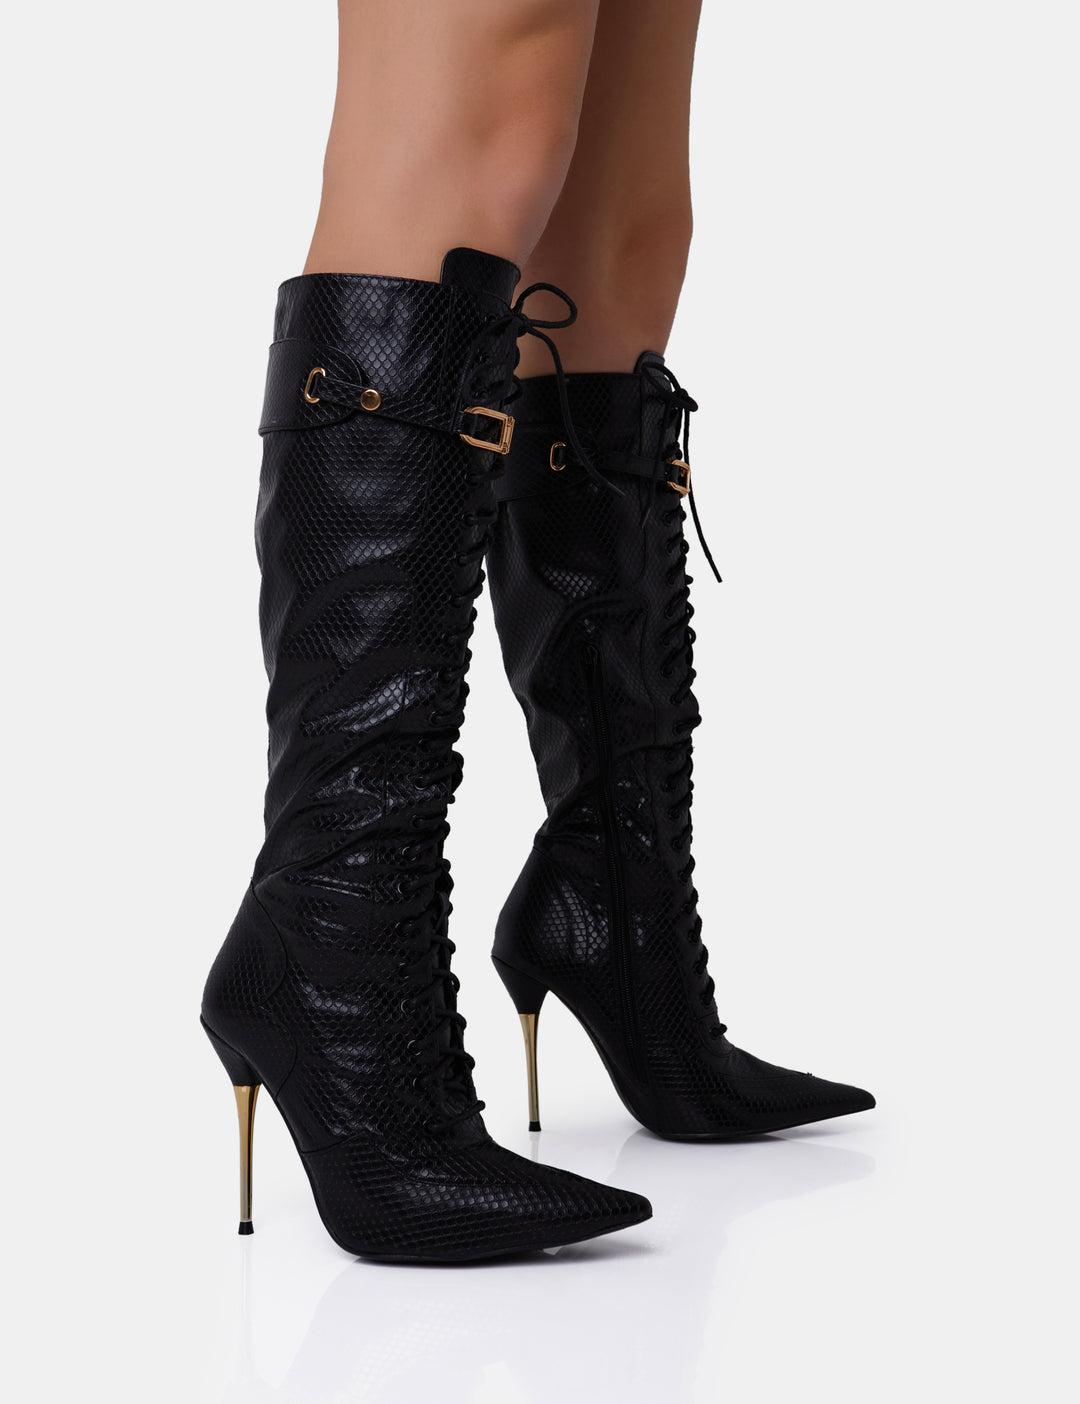 PUBLIC DESIRE INFATUATED CROC LACE UP BUCKLE FEATURE POINTED TOE GOLD STILETTO KNEE HIGH BOOTS